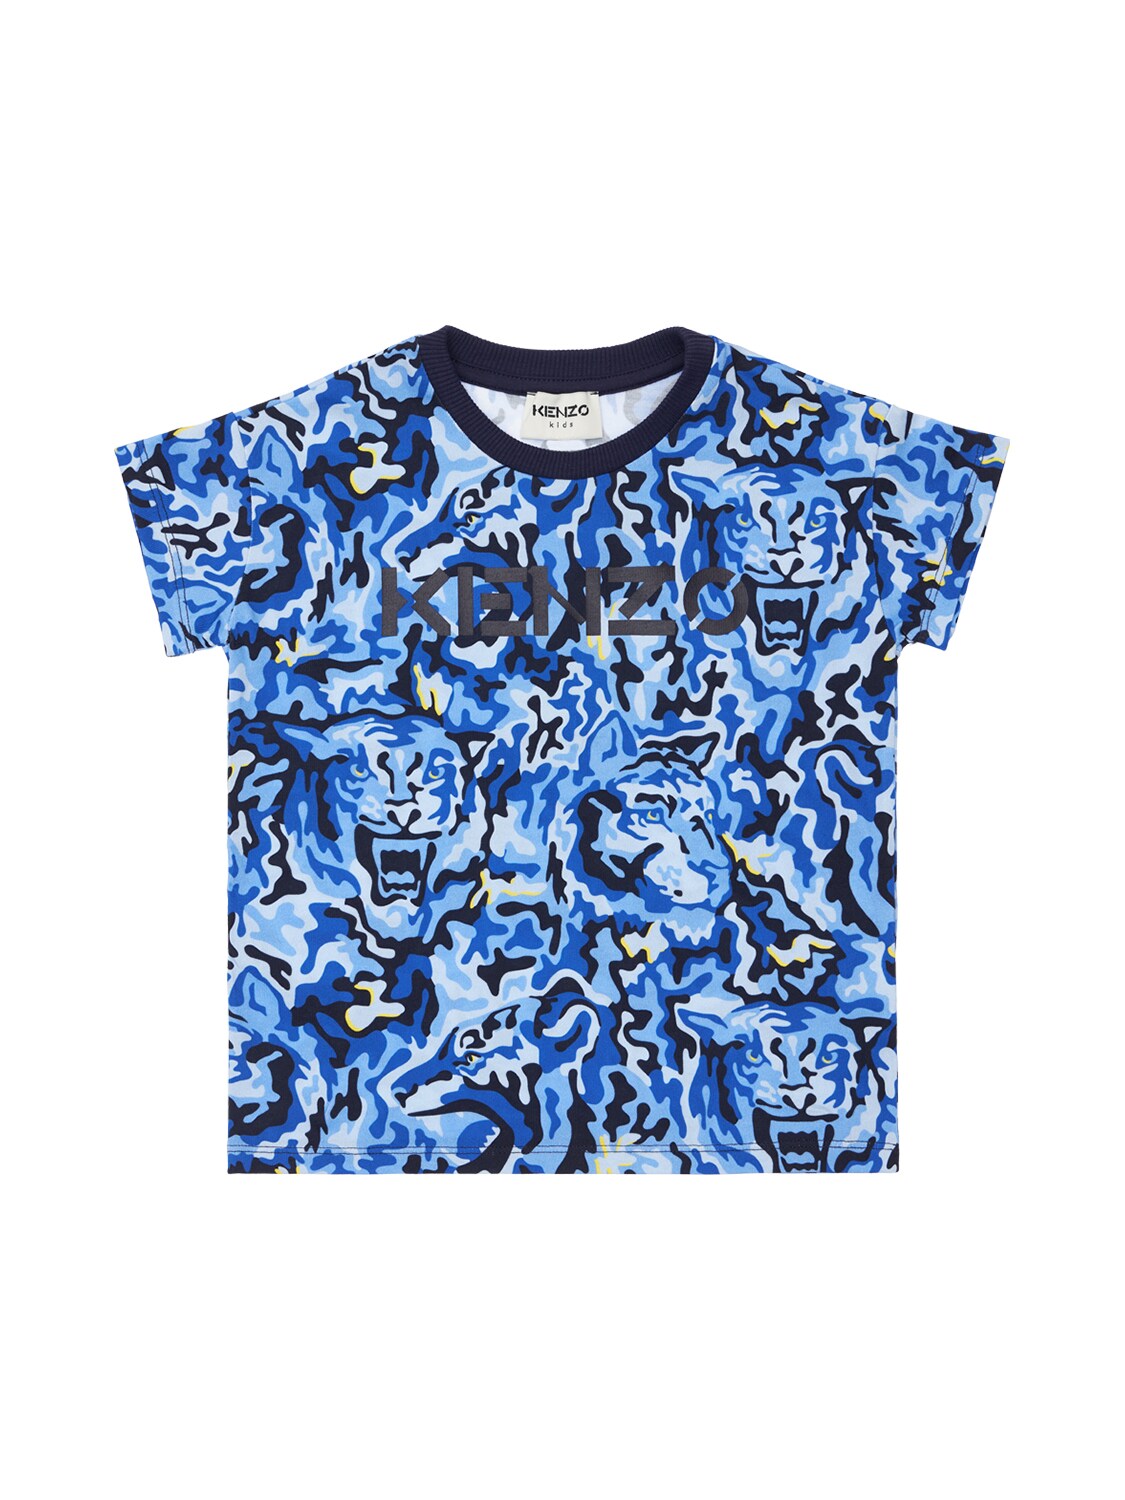 KENZO ALL OVER PRINT COTTON JERSEY T-SHIRT,74I6TC113-ODY40